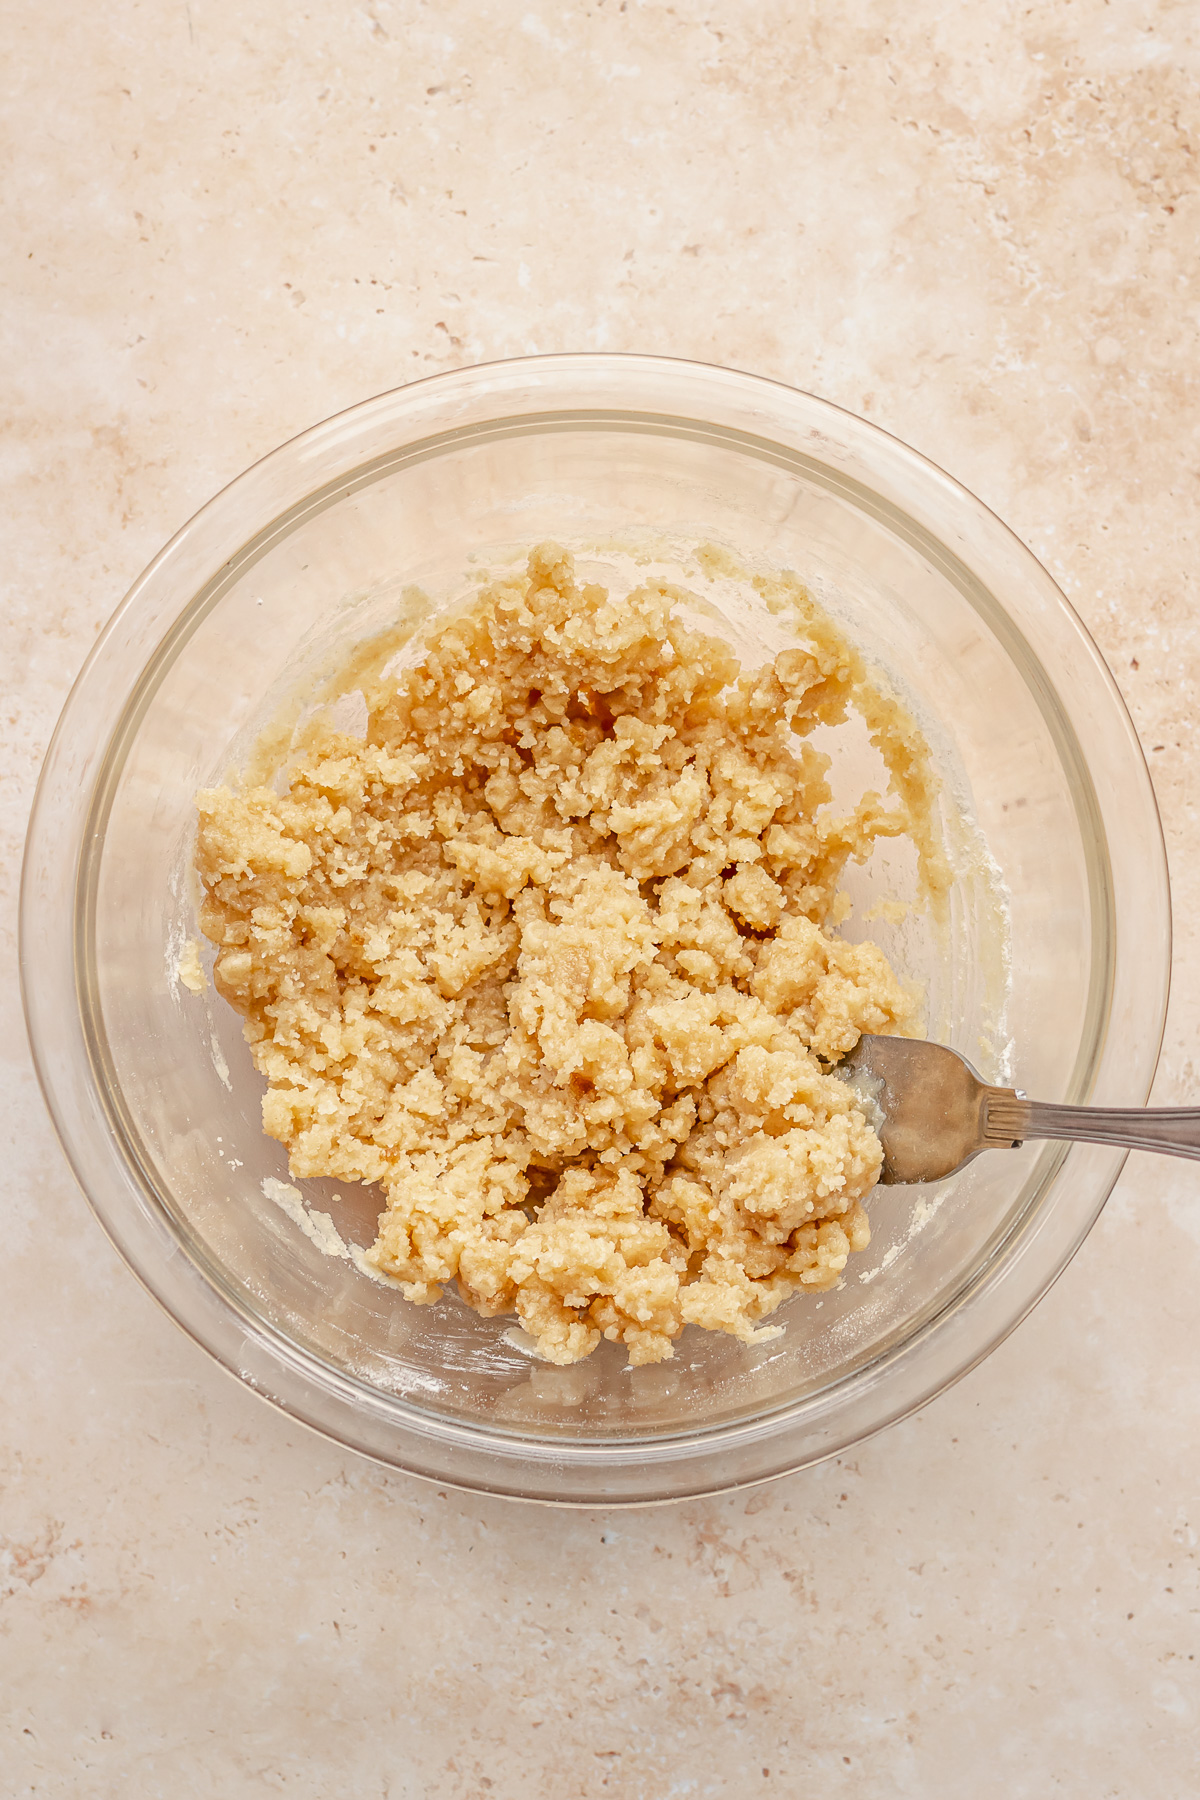 Crumb topping in a bowl.